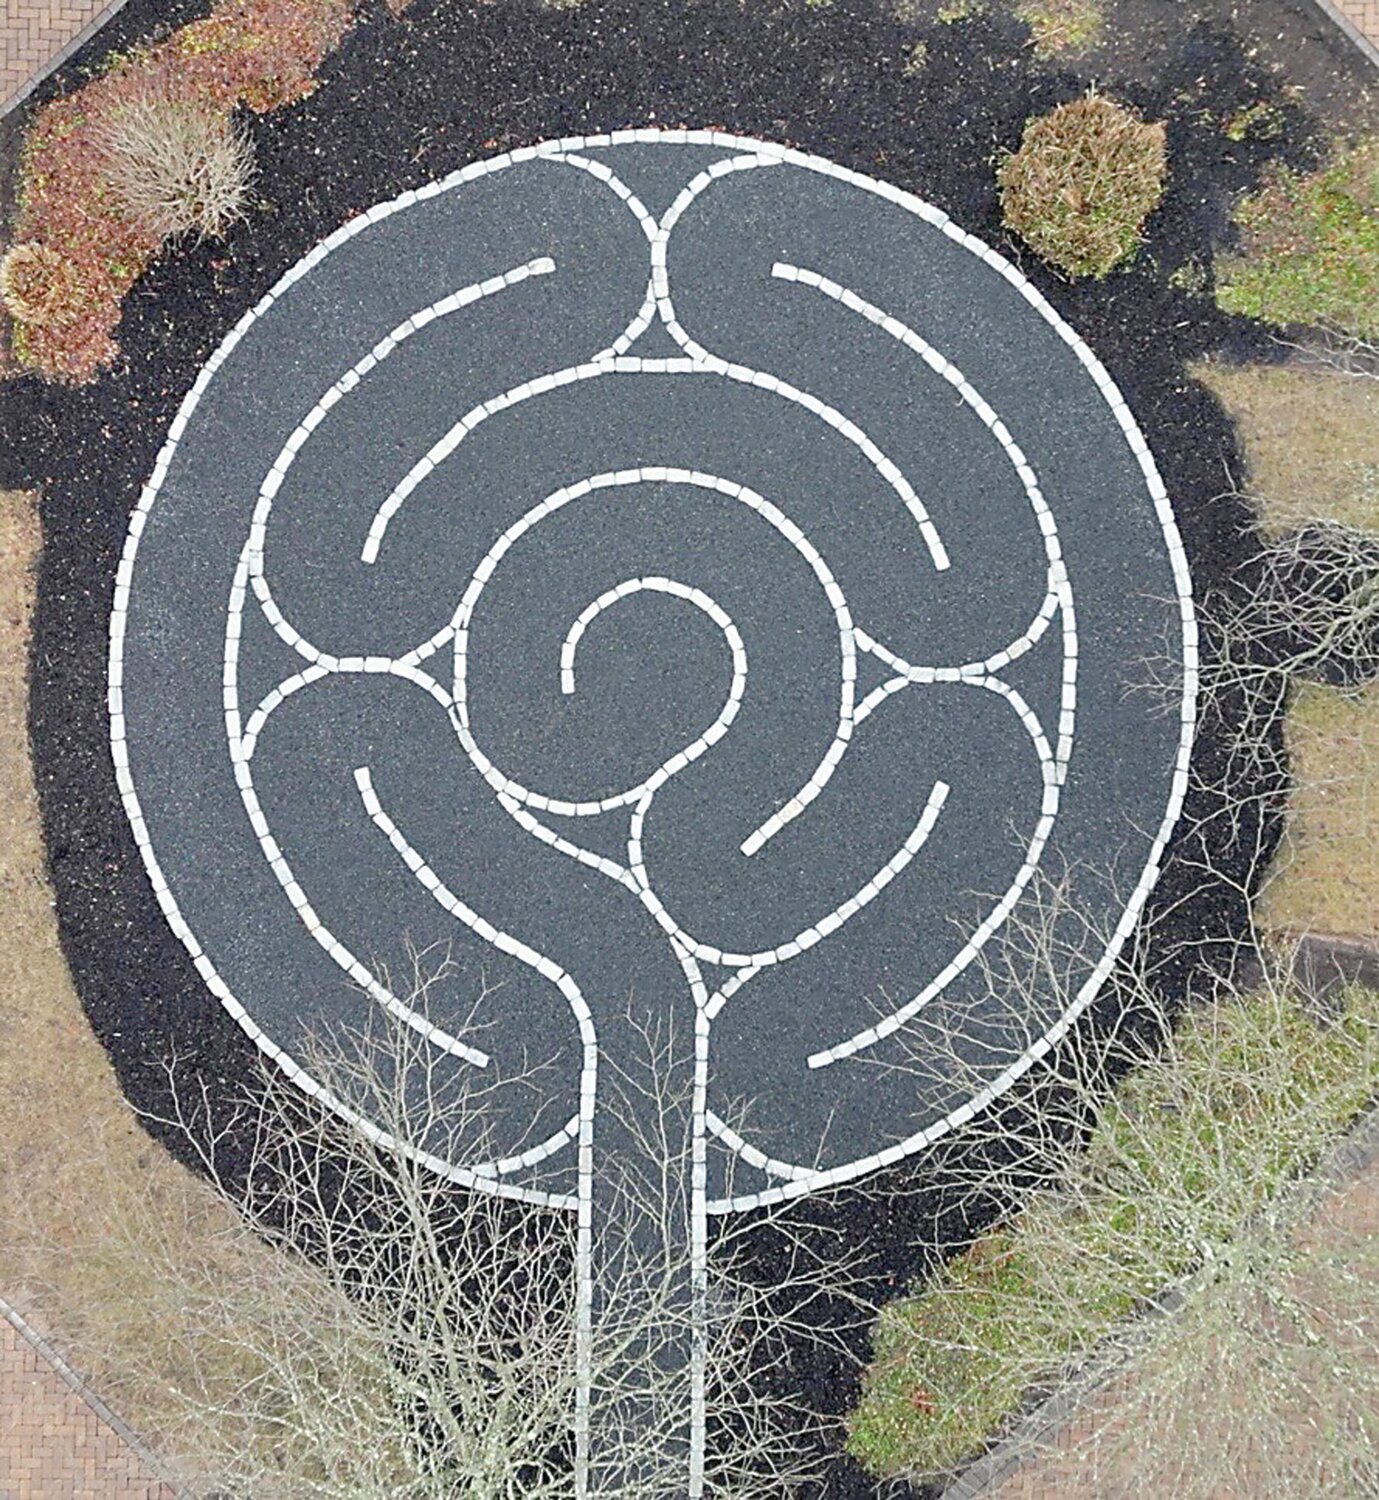 An aerial view of the new labyrinth at Kin Wellness and Support Center.